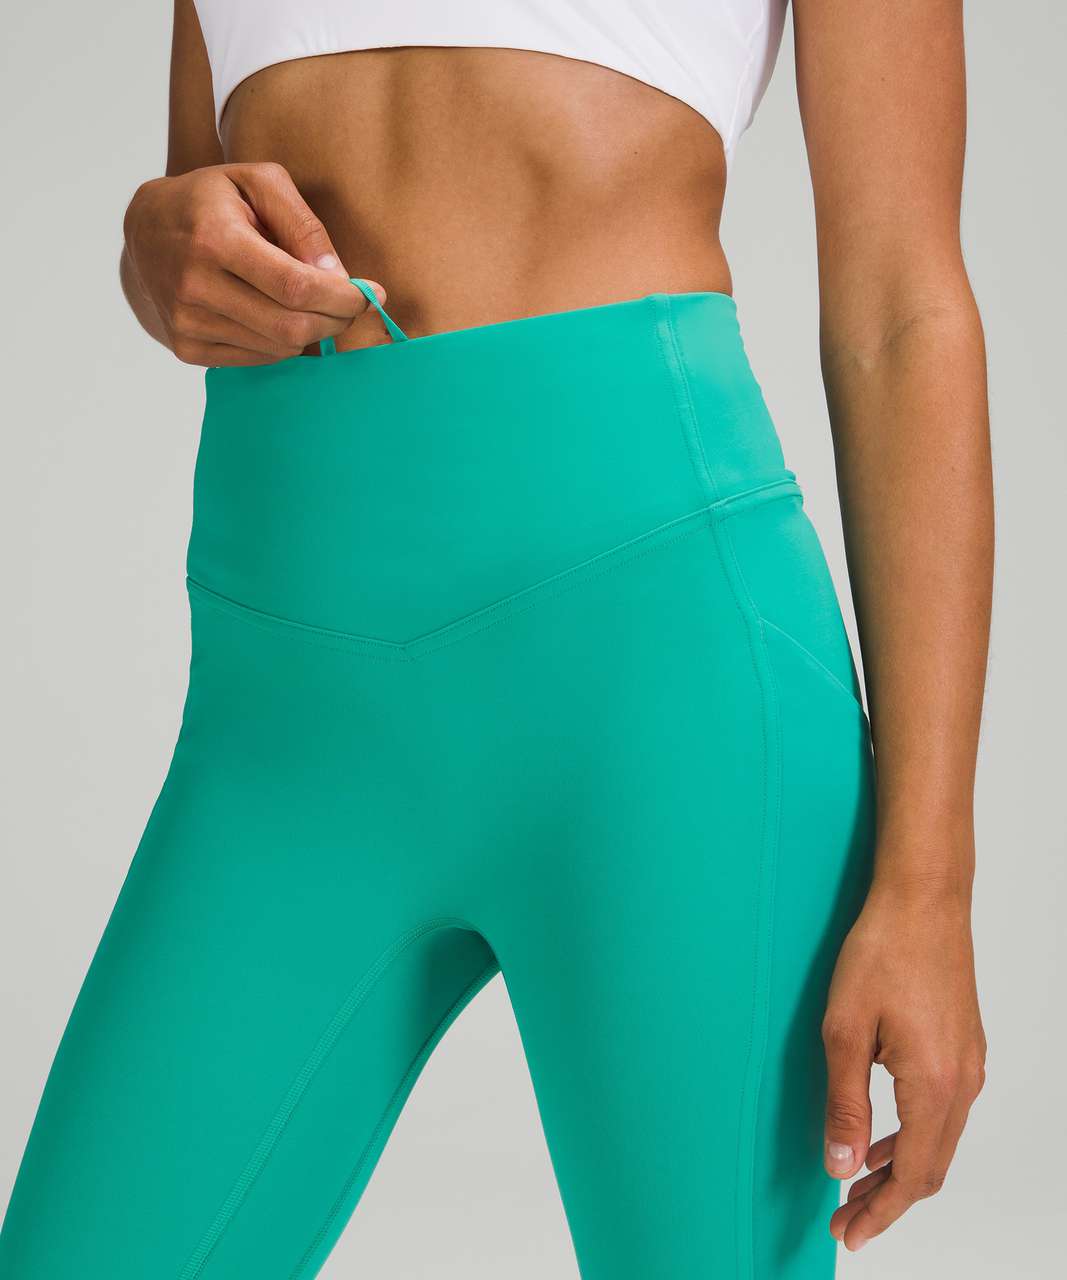 Lululemon All the Right Places High-Rise Crop 23" - Maldives Green